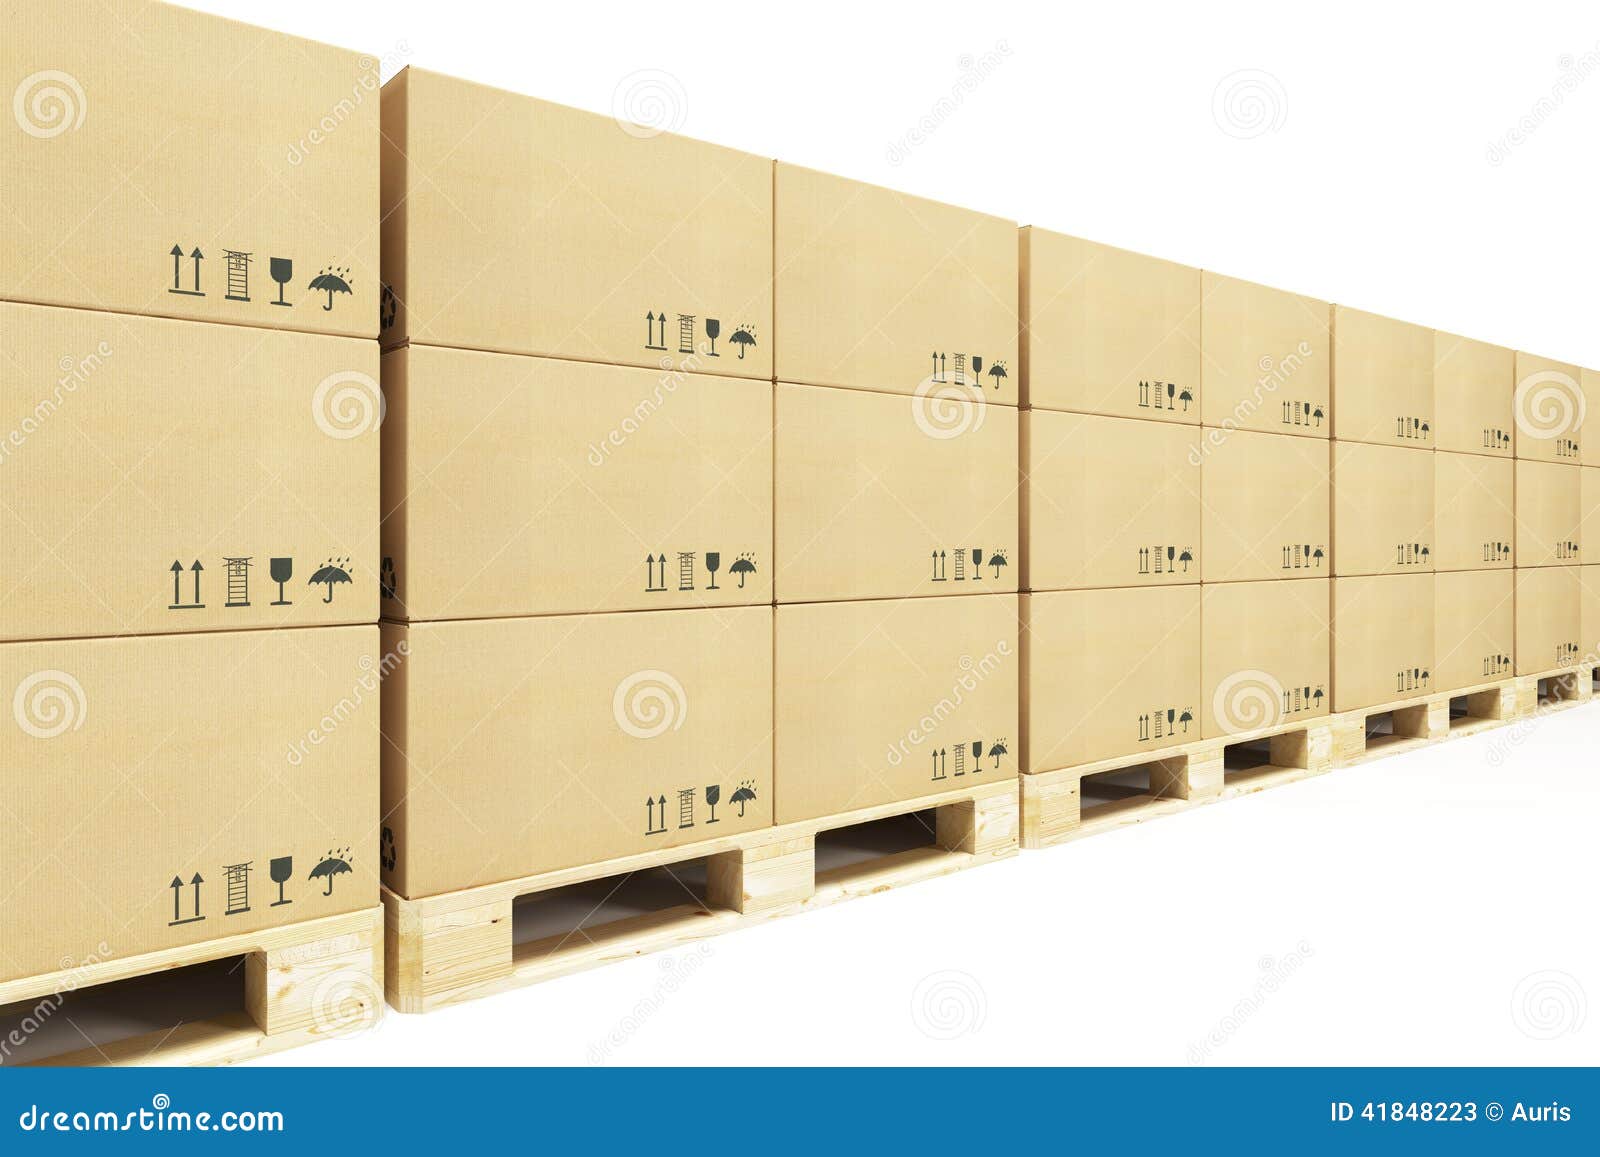 Paper Pallet Placed On Warehouse Stock Photo 1195457248